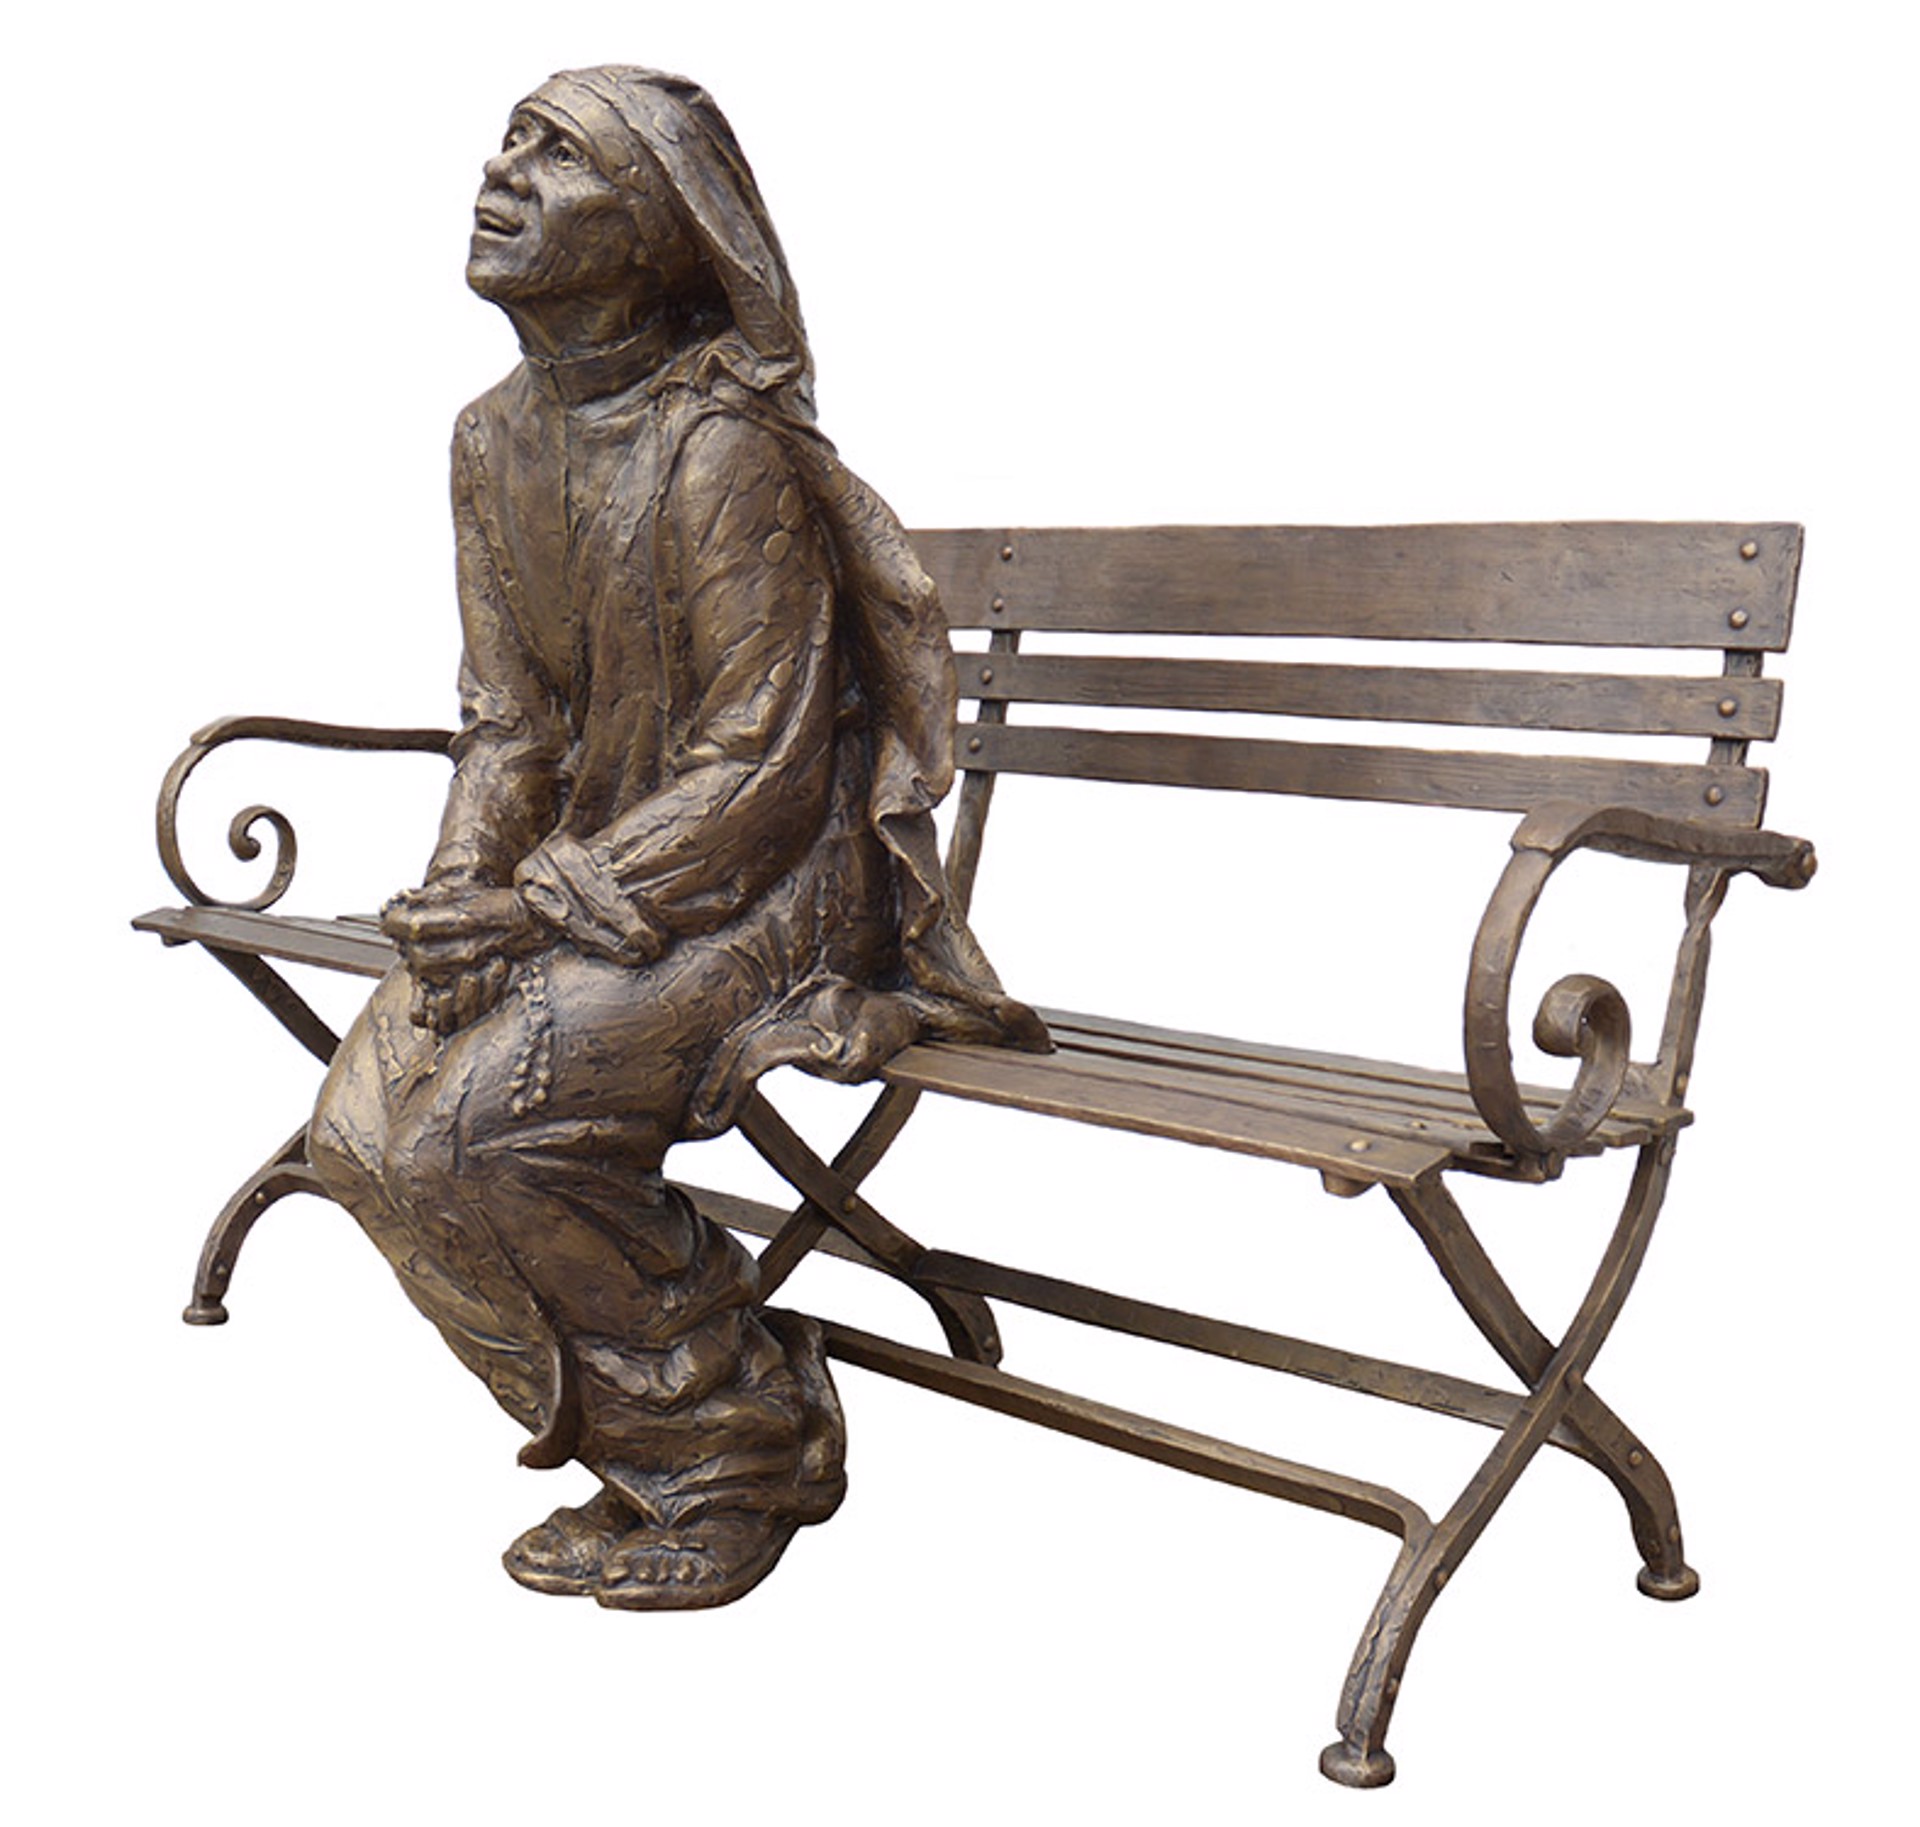 Moher Teresa Bench by Gary Lee Price (sculptor)